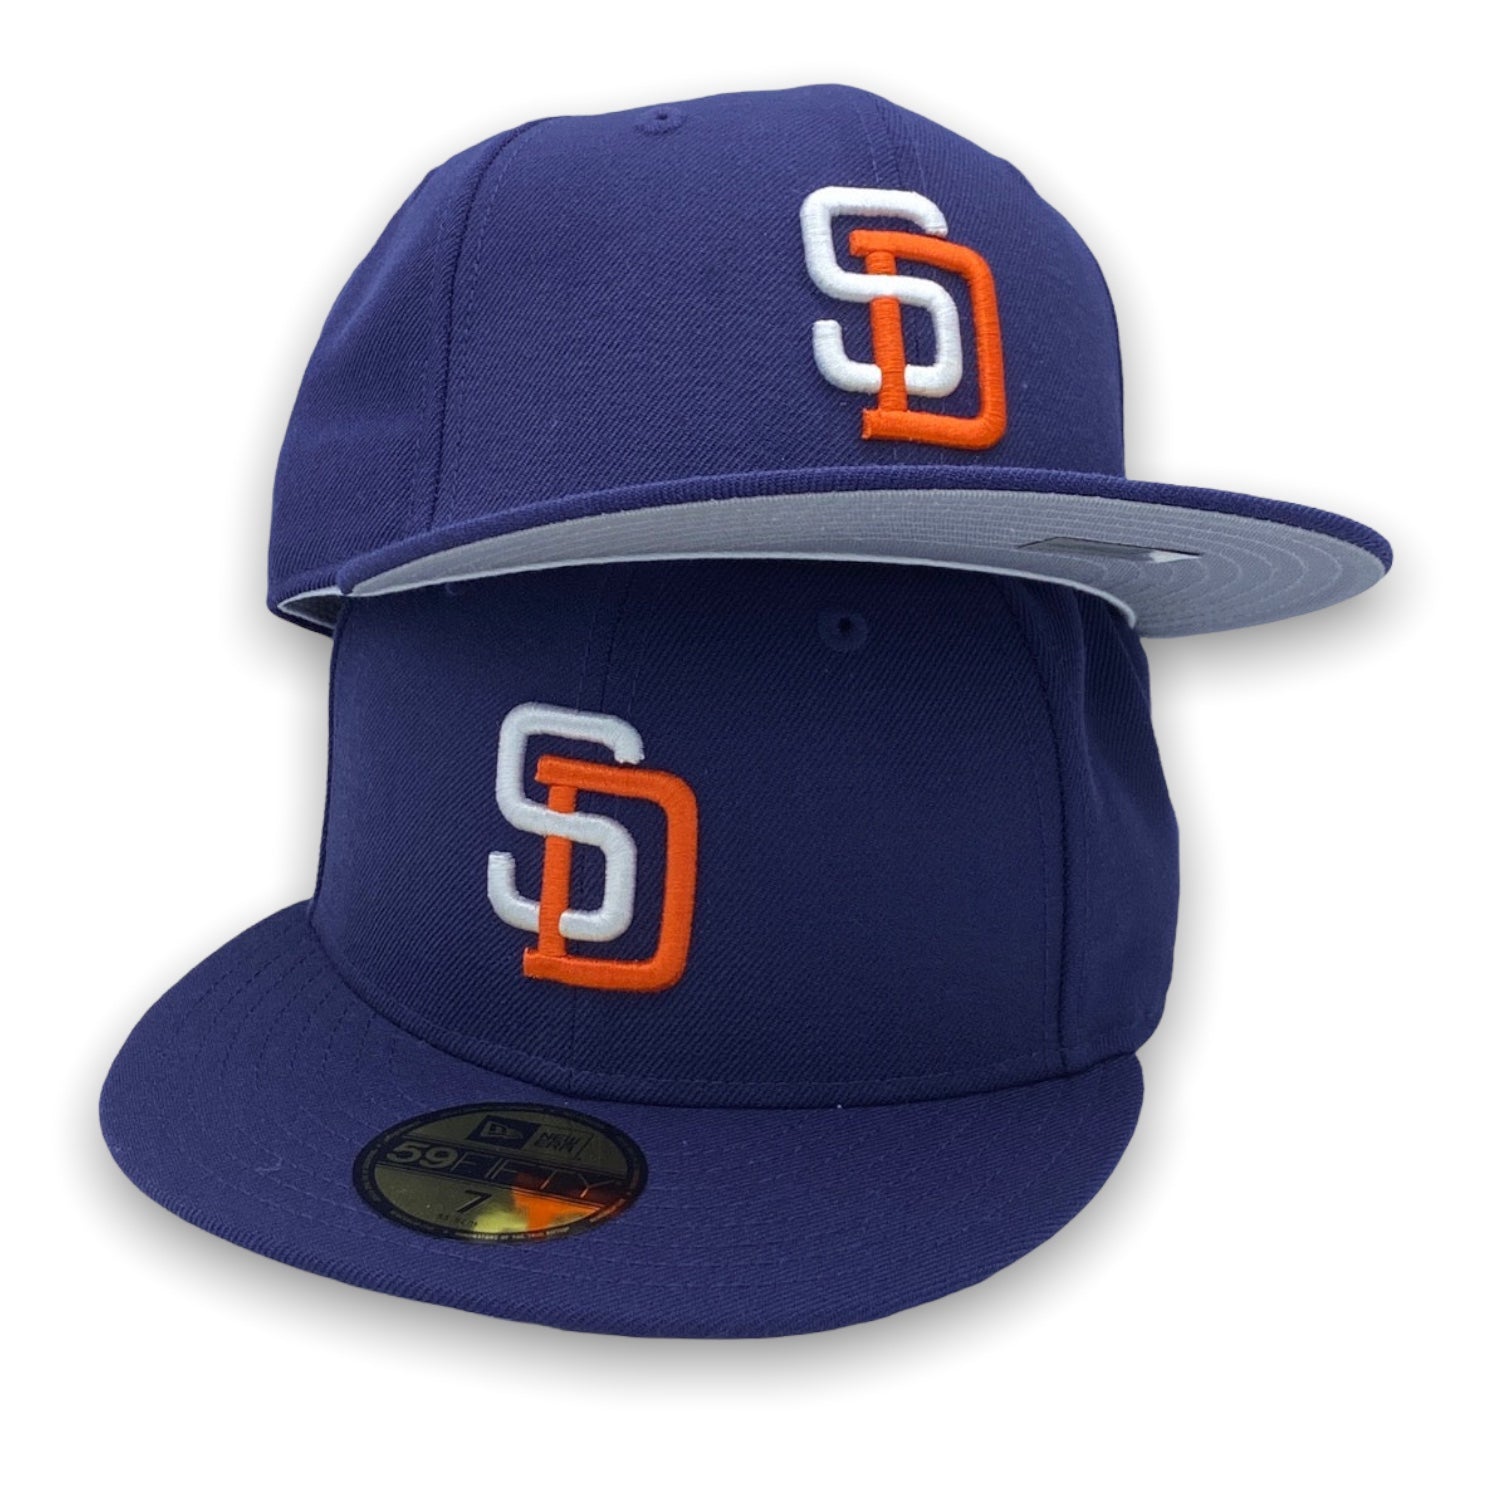 San Diego Padres Authentic Collection 59FIFTY New Era Light Purple Hat –  USA CAP KING